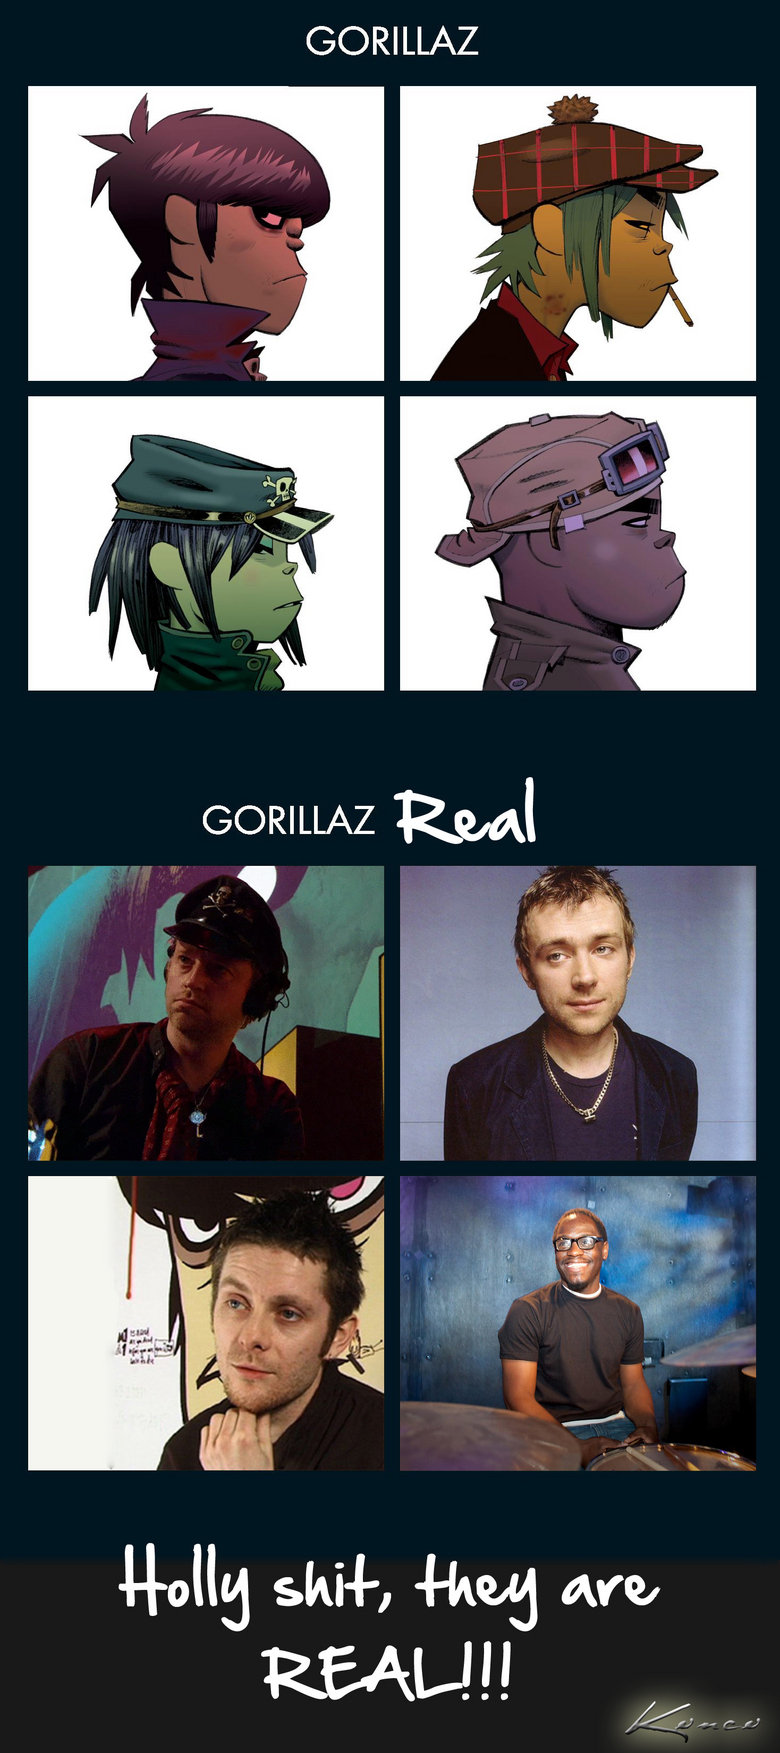 They are real!. . GORILLAZ GORILLAZ kw! glalie skial-, ‘ are. can you make them more real?